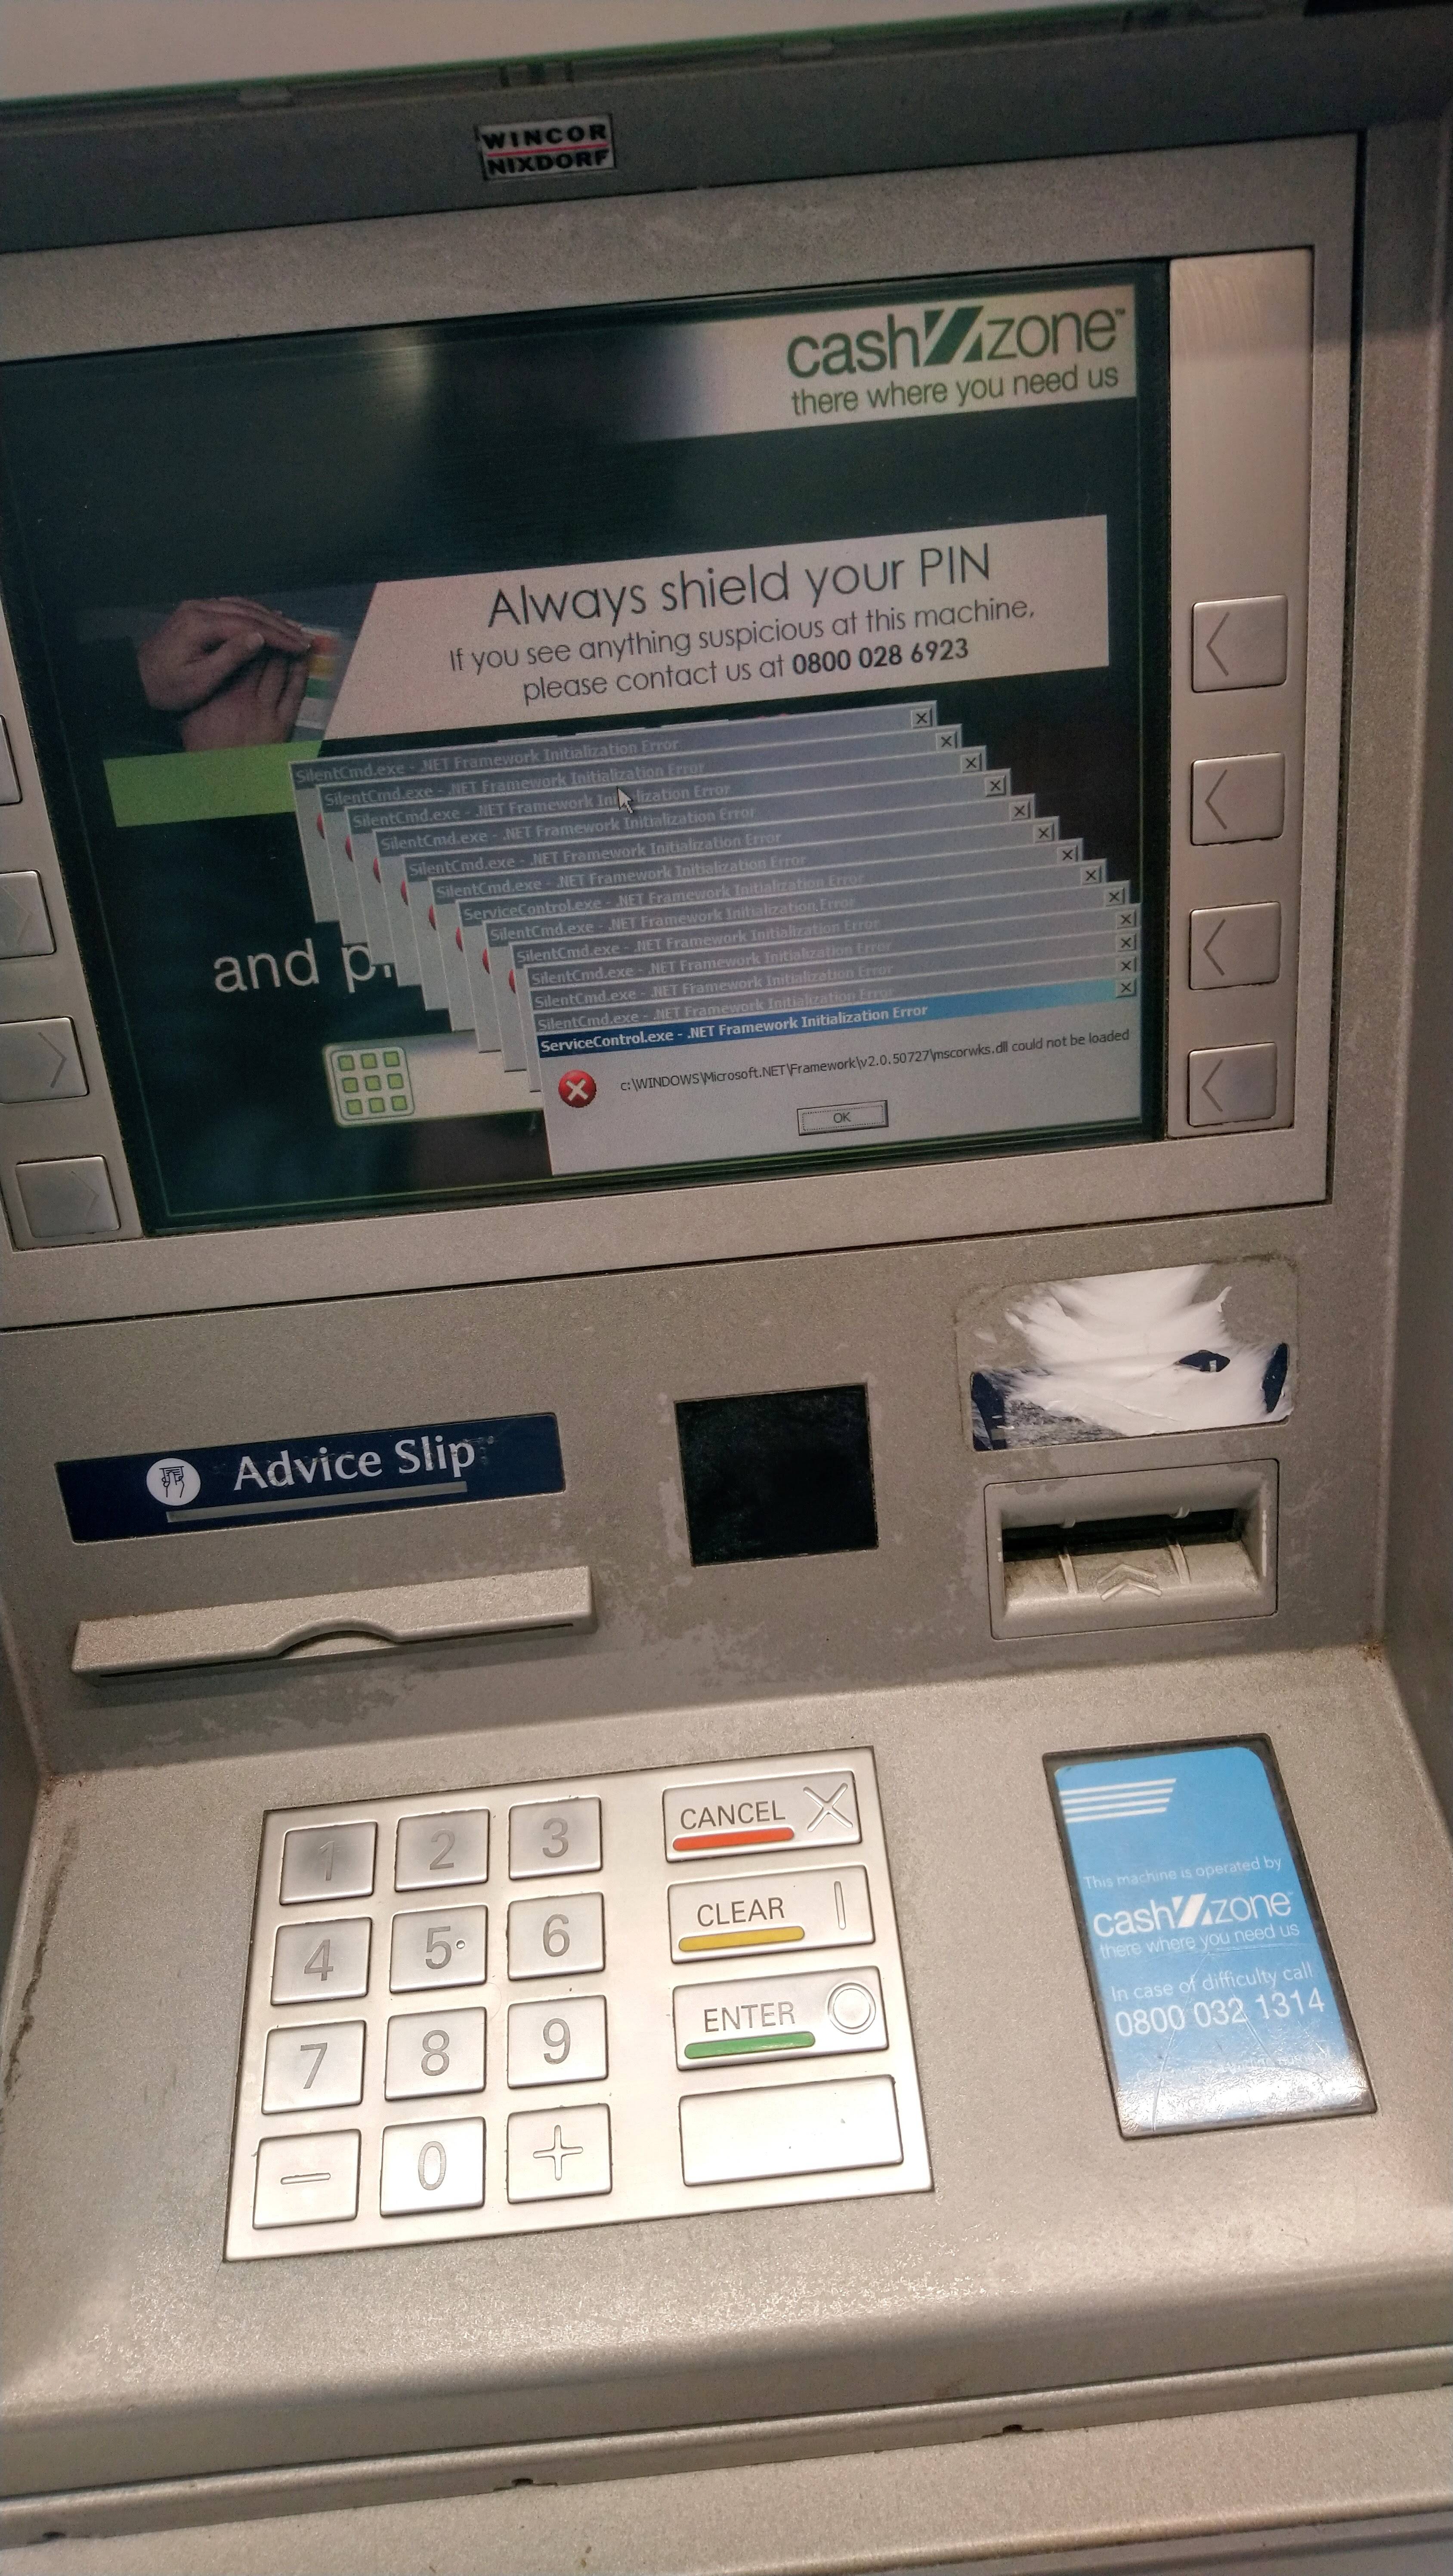 Happy birthday, Microsoft Money: Here's a cashpoint calamity for Windows and .NET thumbnail